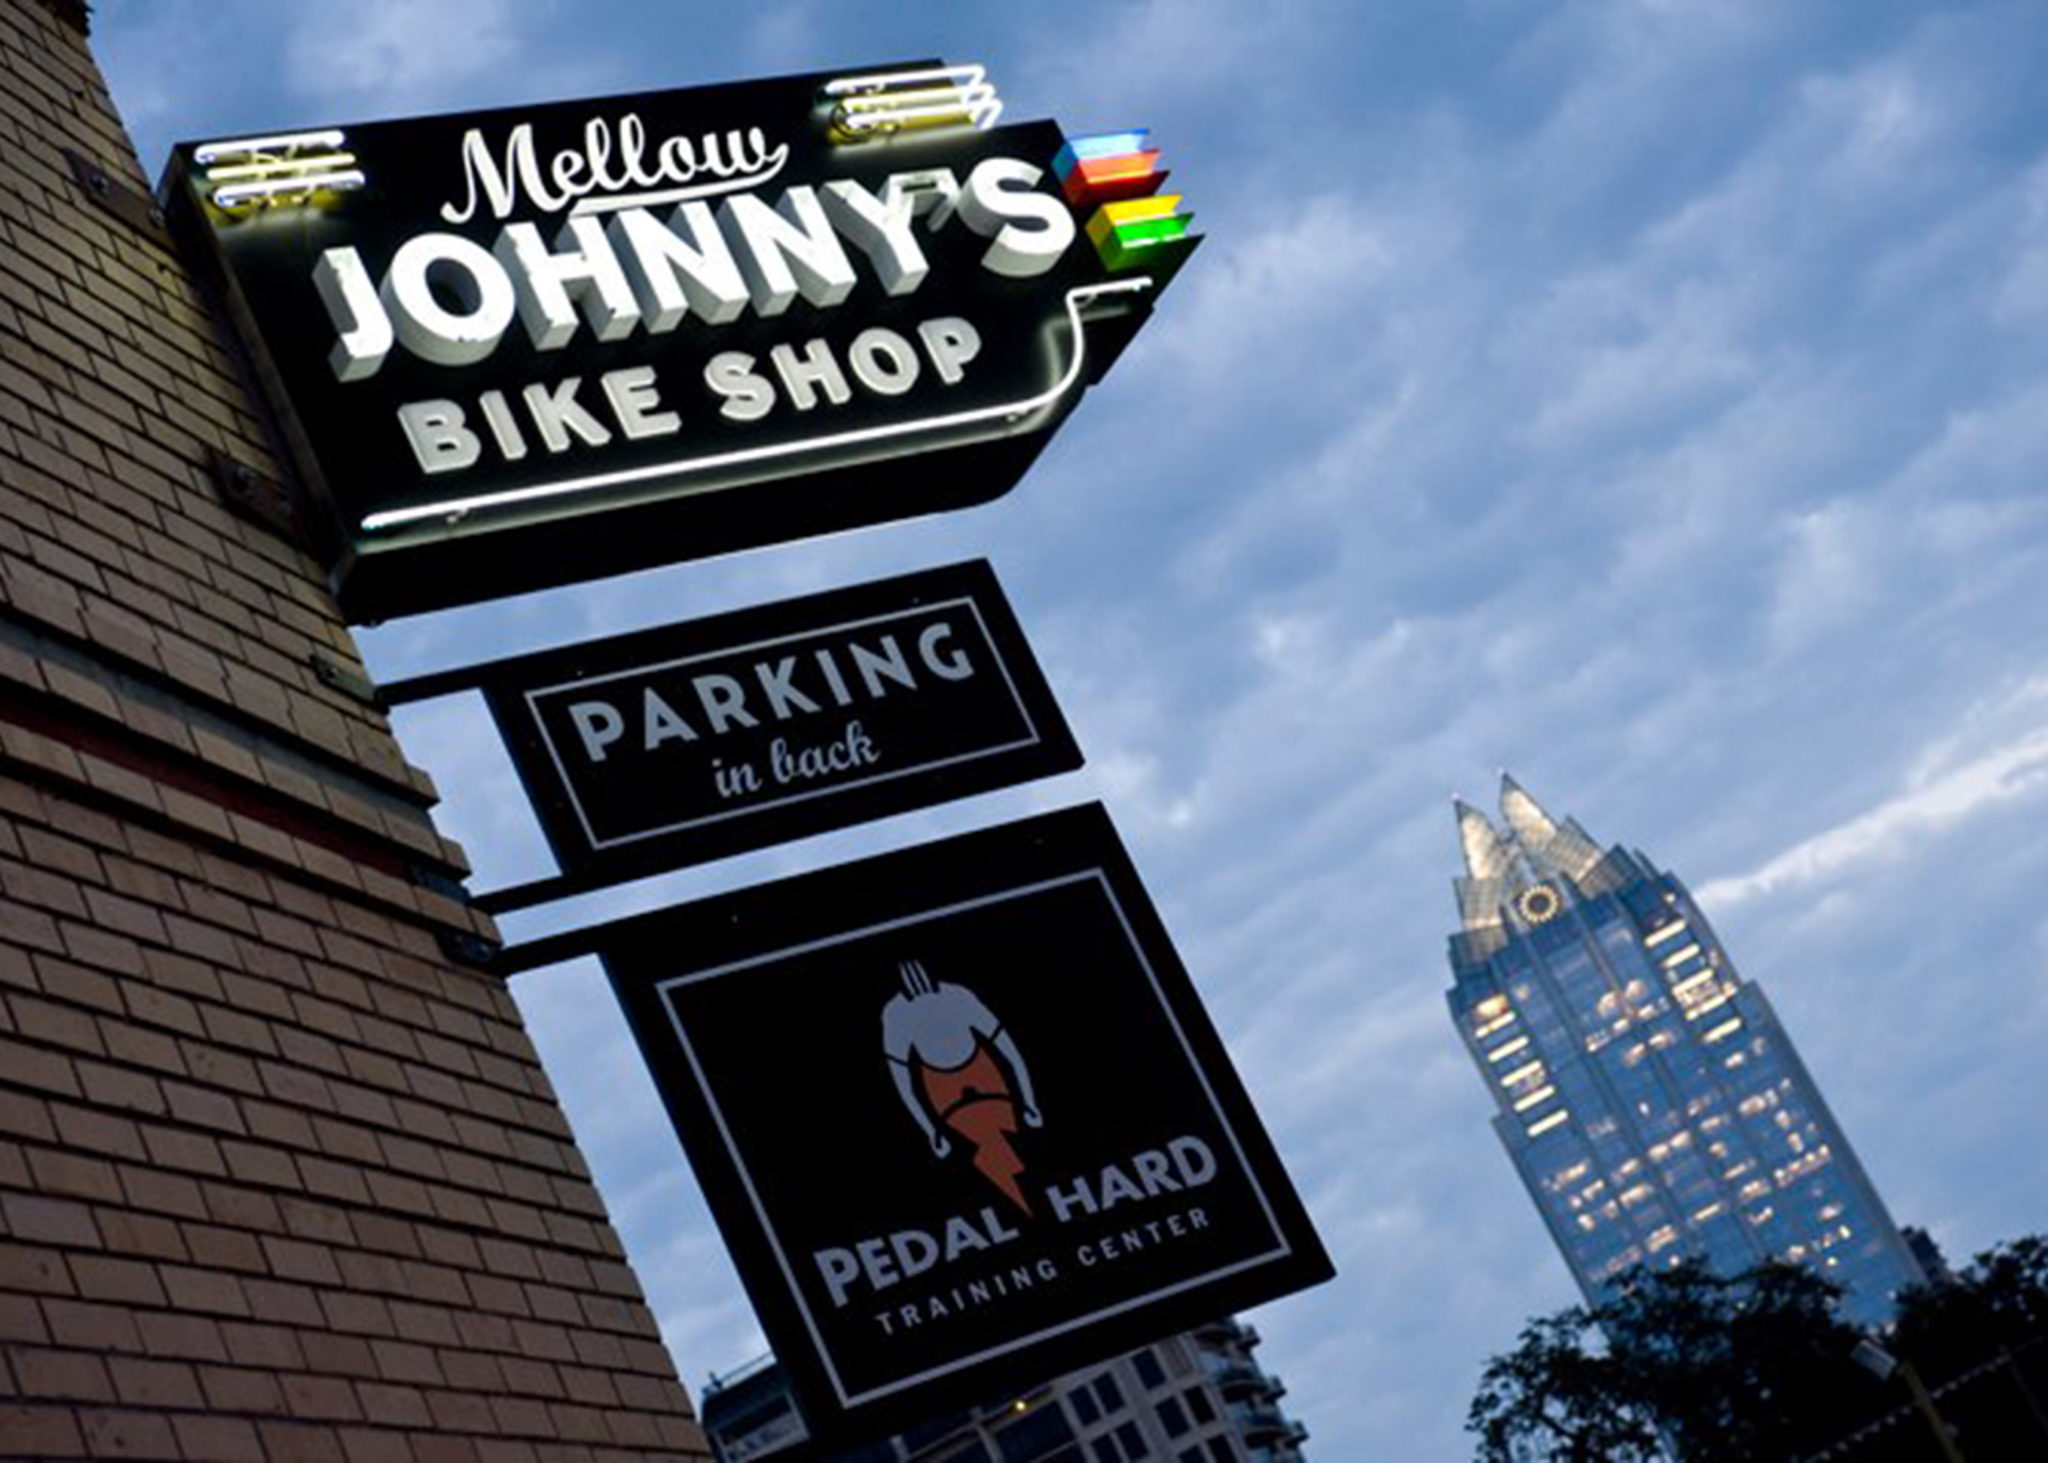 Mellow Johnny's Bike Shop store sign